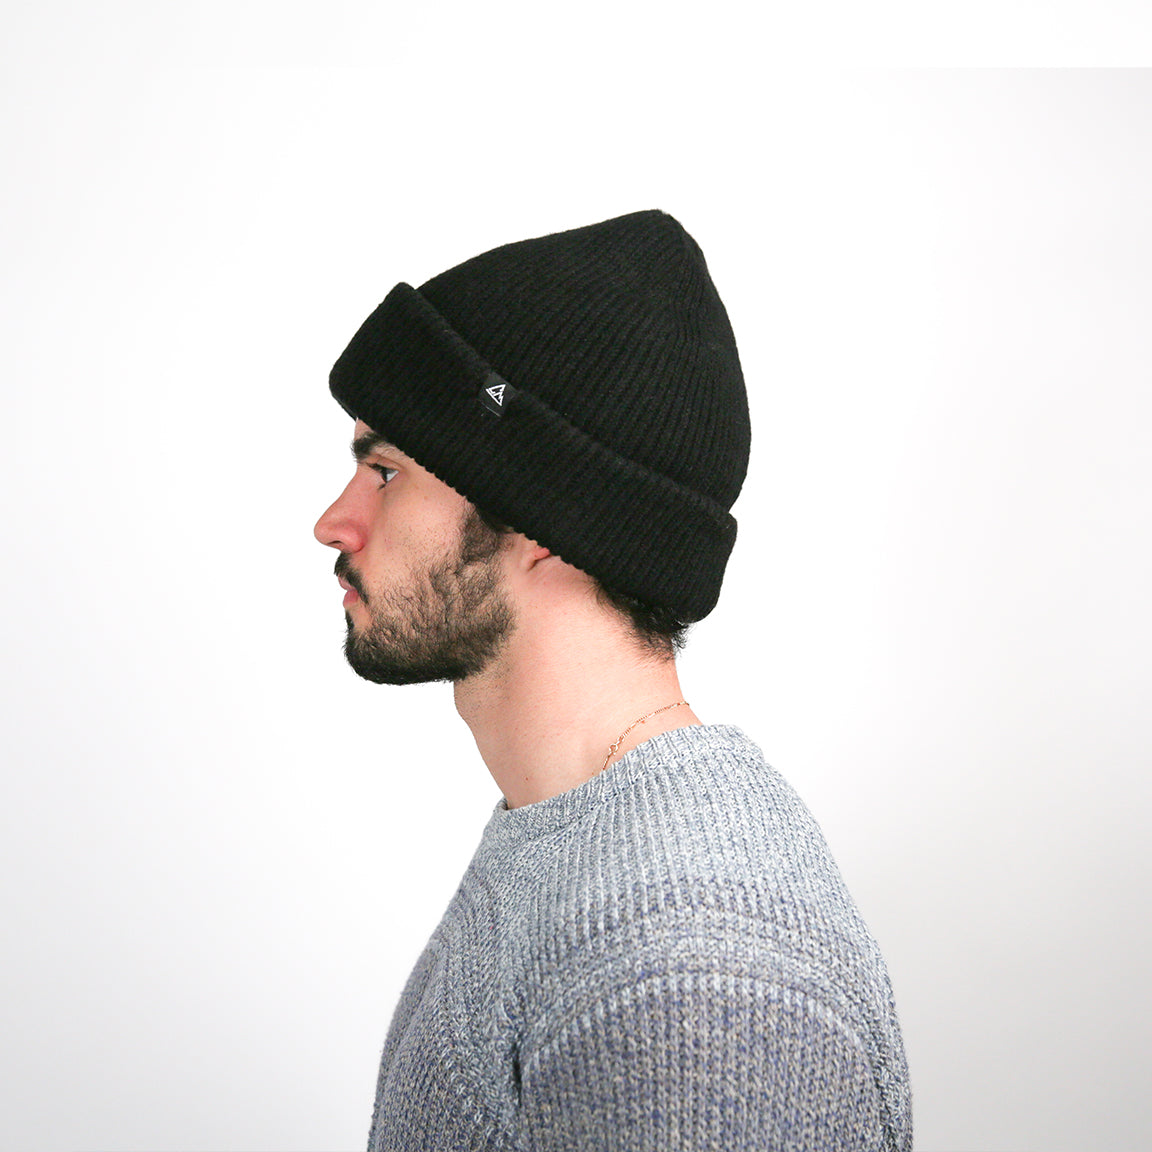 Displayed is a person wearing a classic knit beanie in solid black. The beanie has a ribbed texture with a cuffed brim, providing a snug and comfortable fit for a casual look.